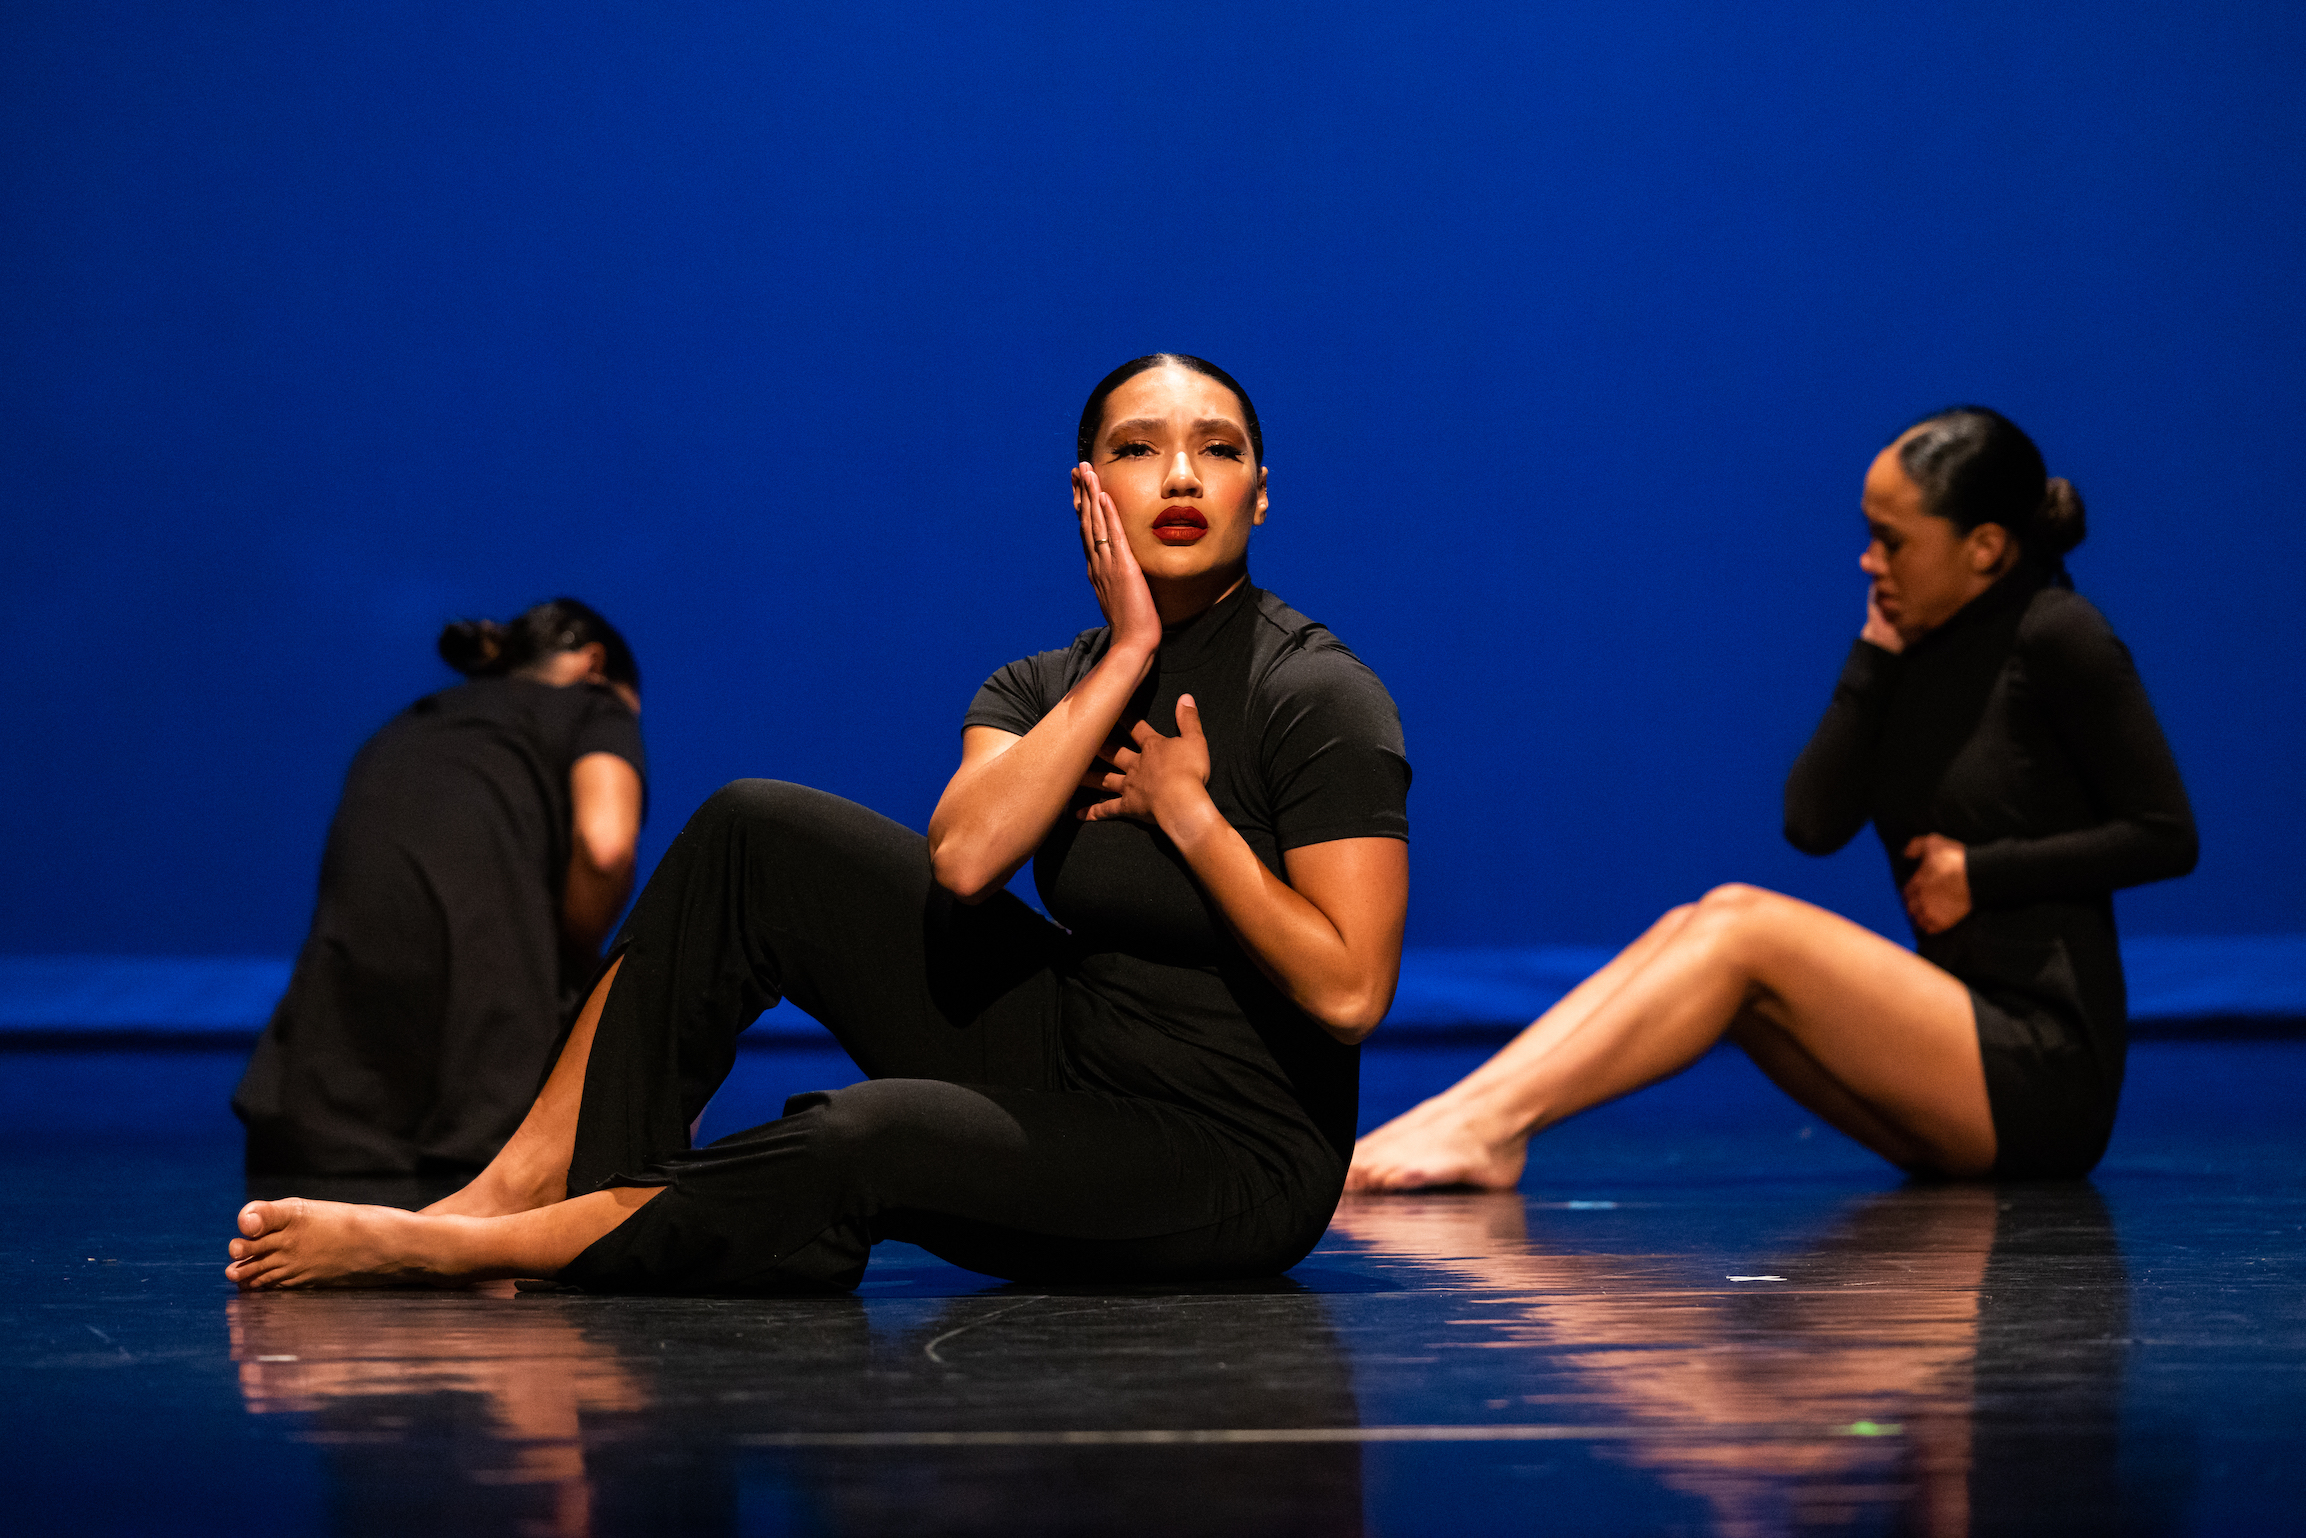 three dancers in black sitting on stage with a blue screen behind them